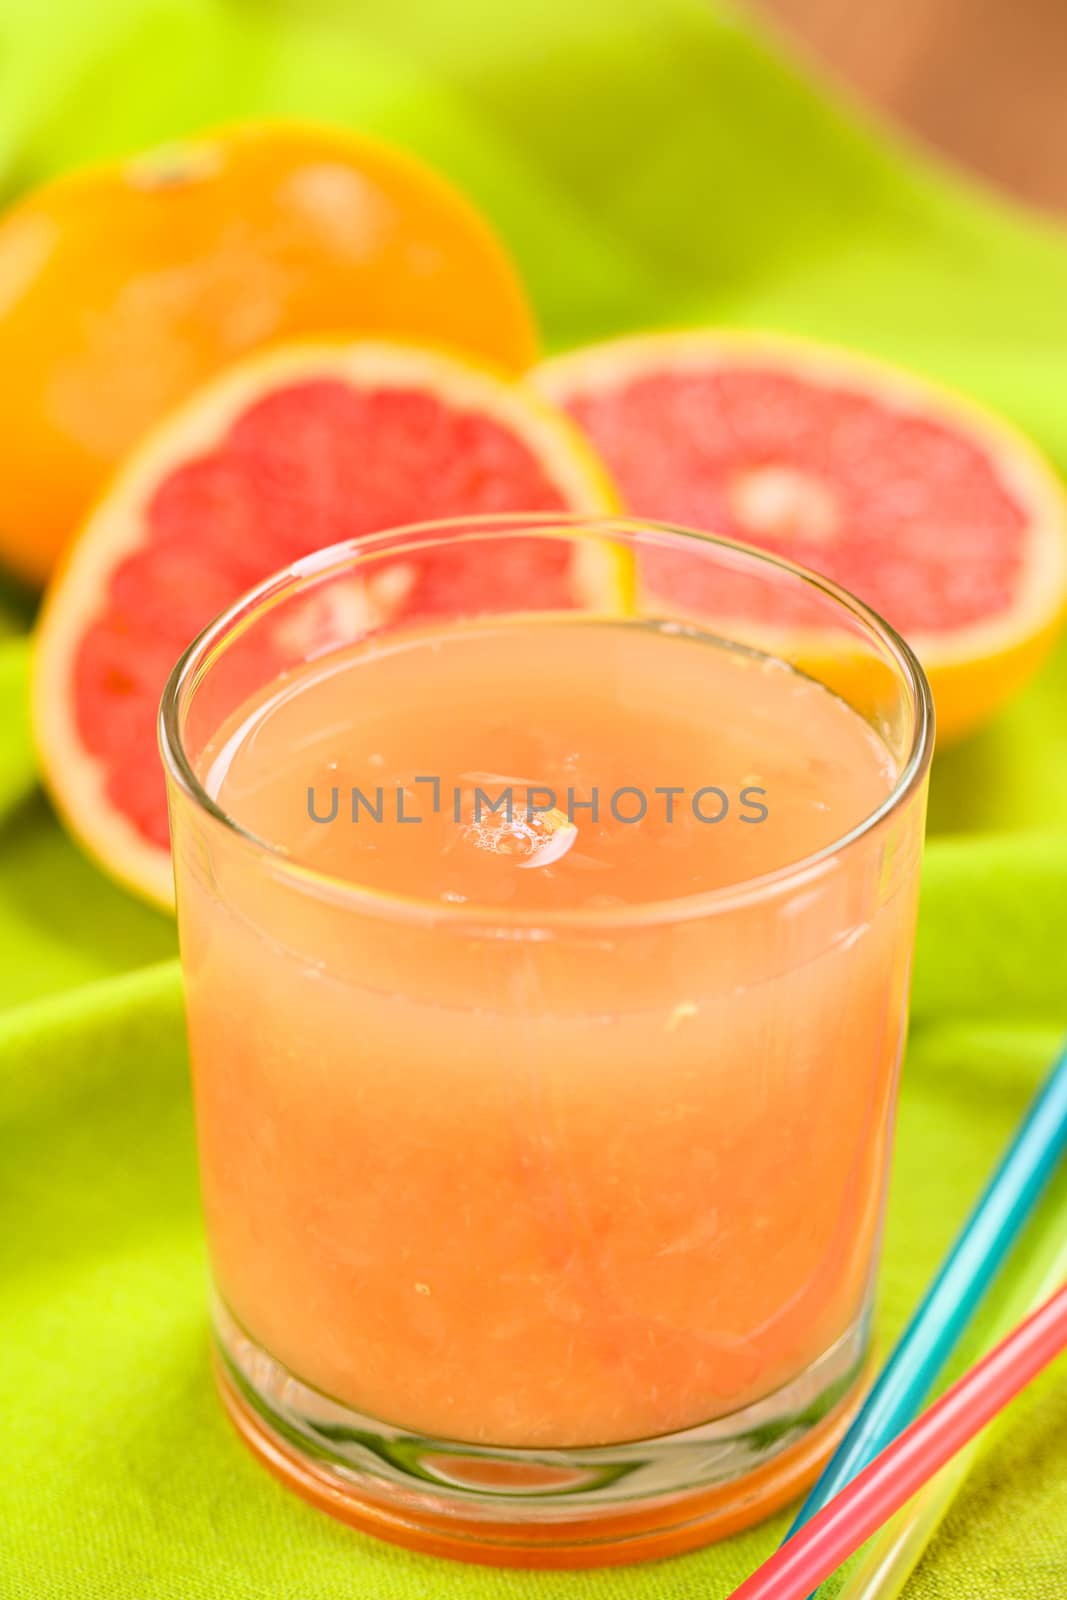 Freshly squeezed juice of the pink-fleshed grapefruit with colorful drinking straws on the side and grapefruits in the back on green fabric (Selective Focus, Focus on the bubble on the middle of the juice)